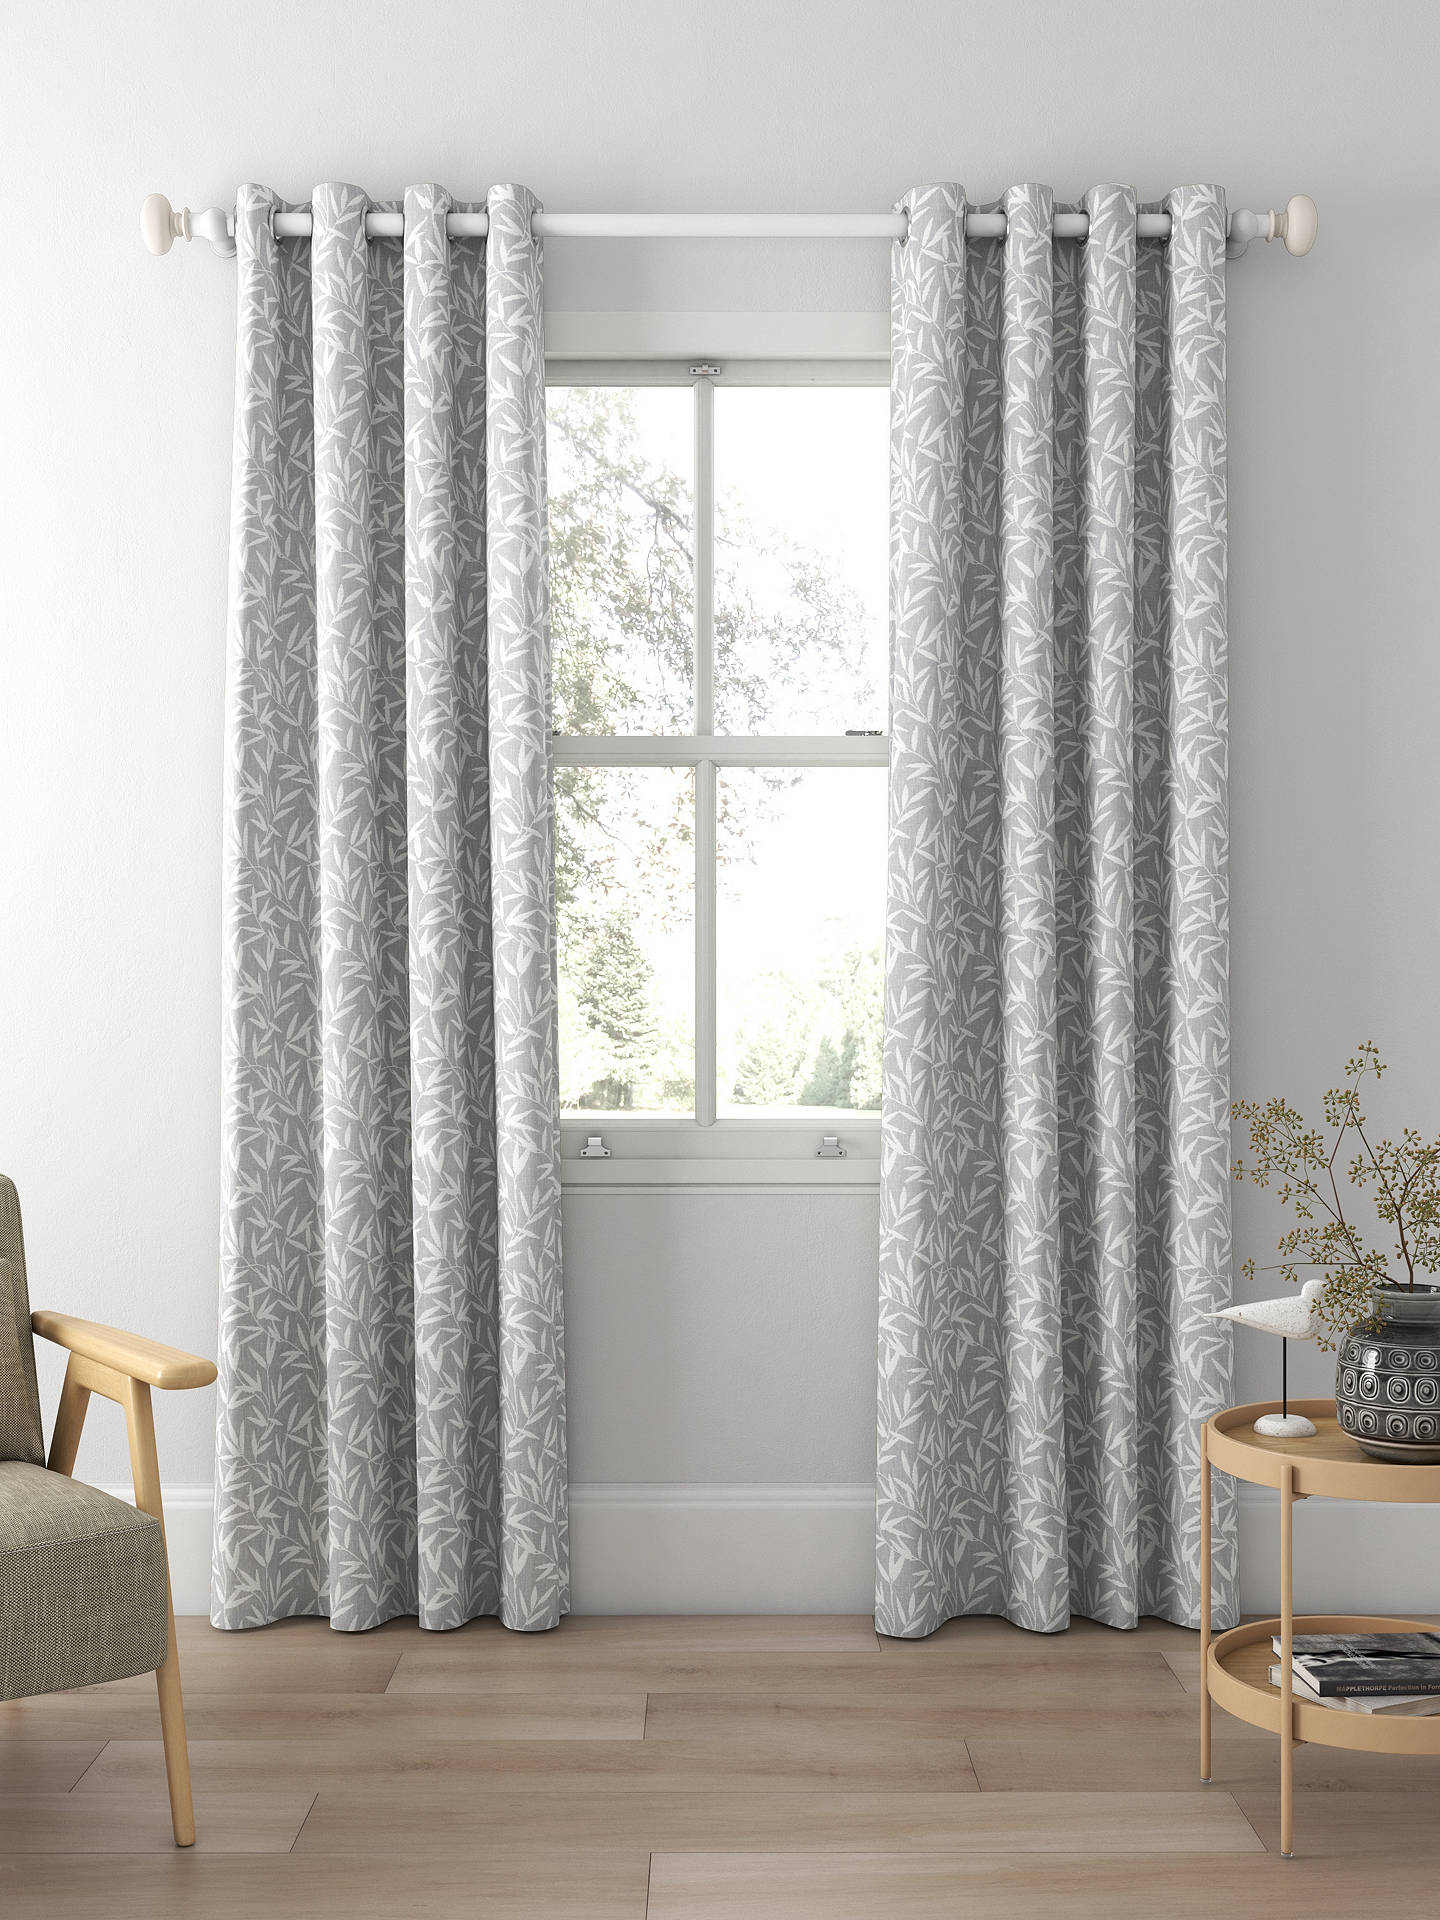 Laura Ashley Willow Leaf Chenille Made to Measure Curtains, Steel